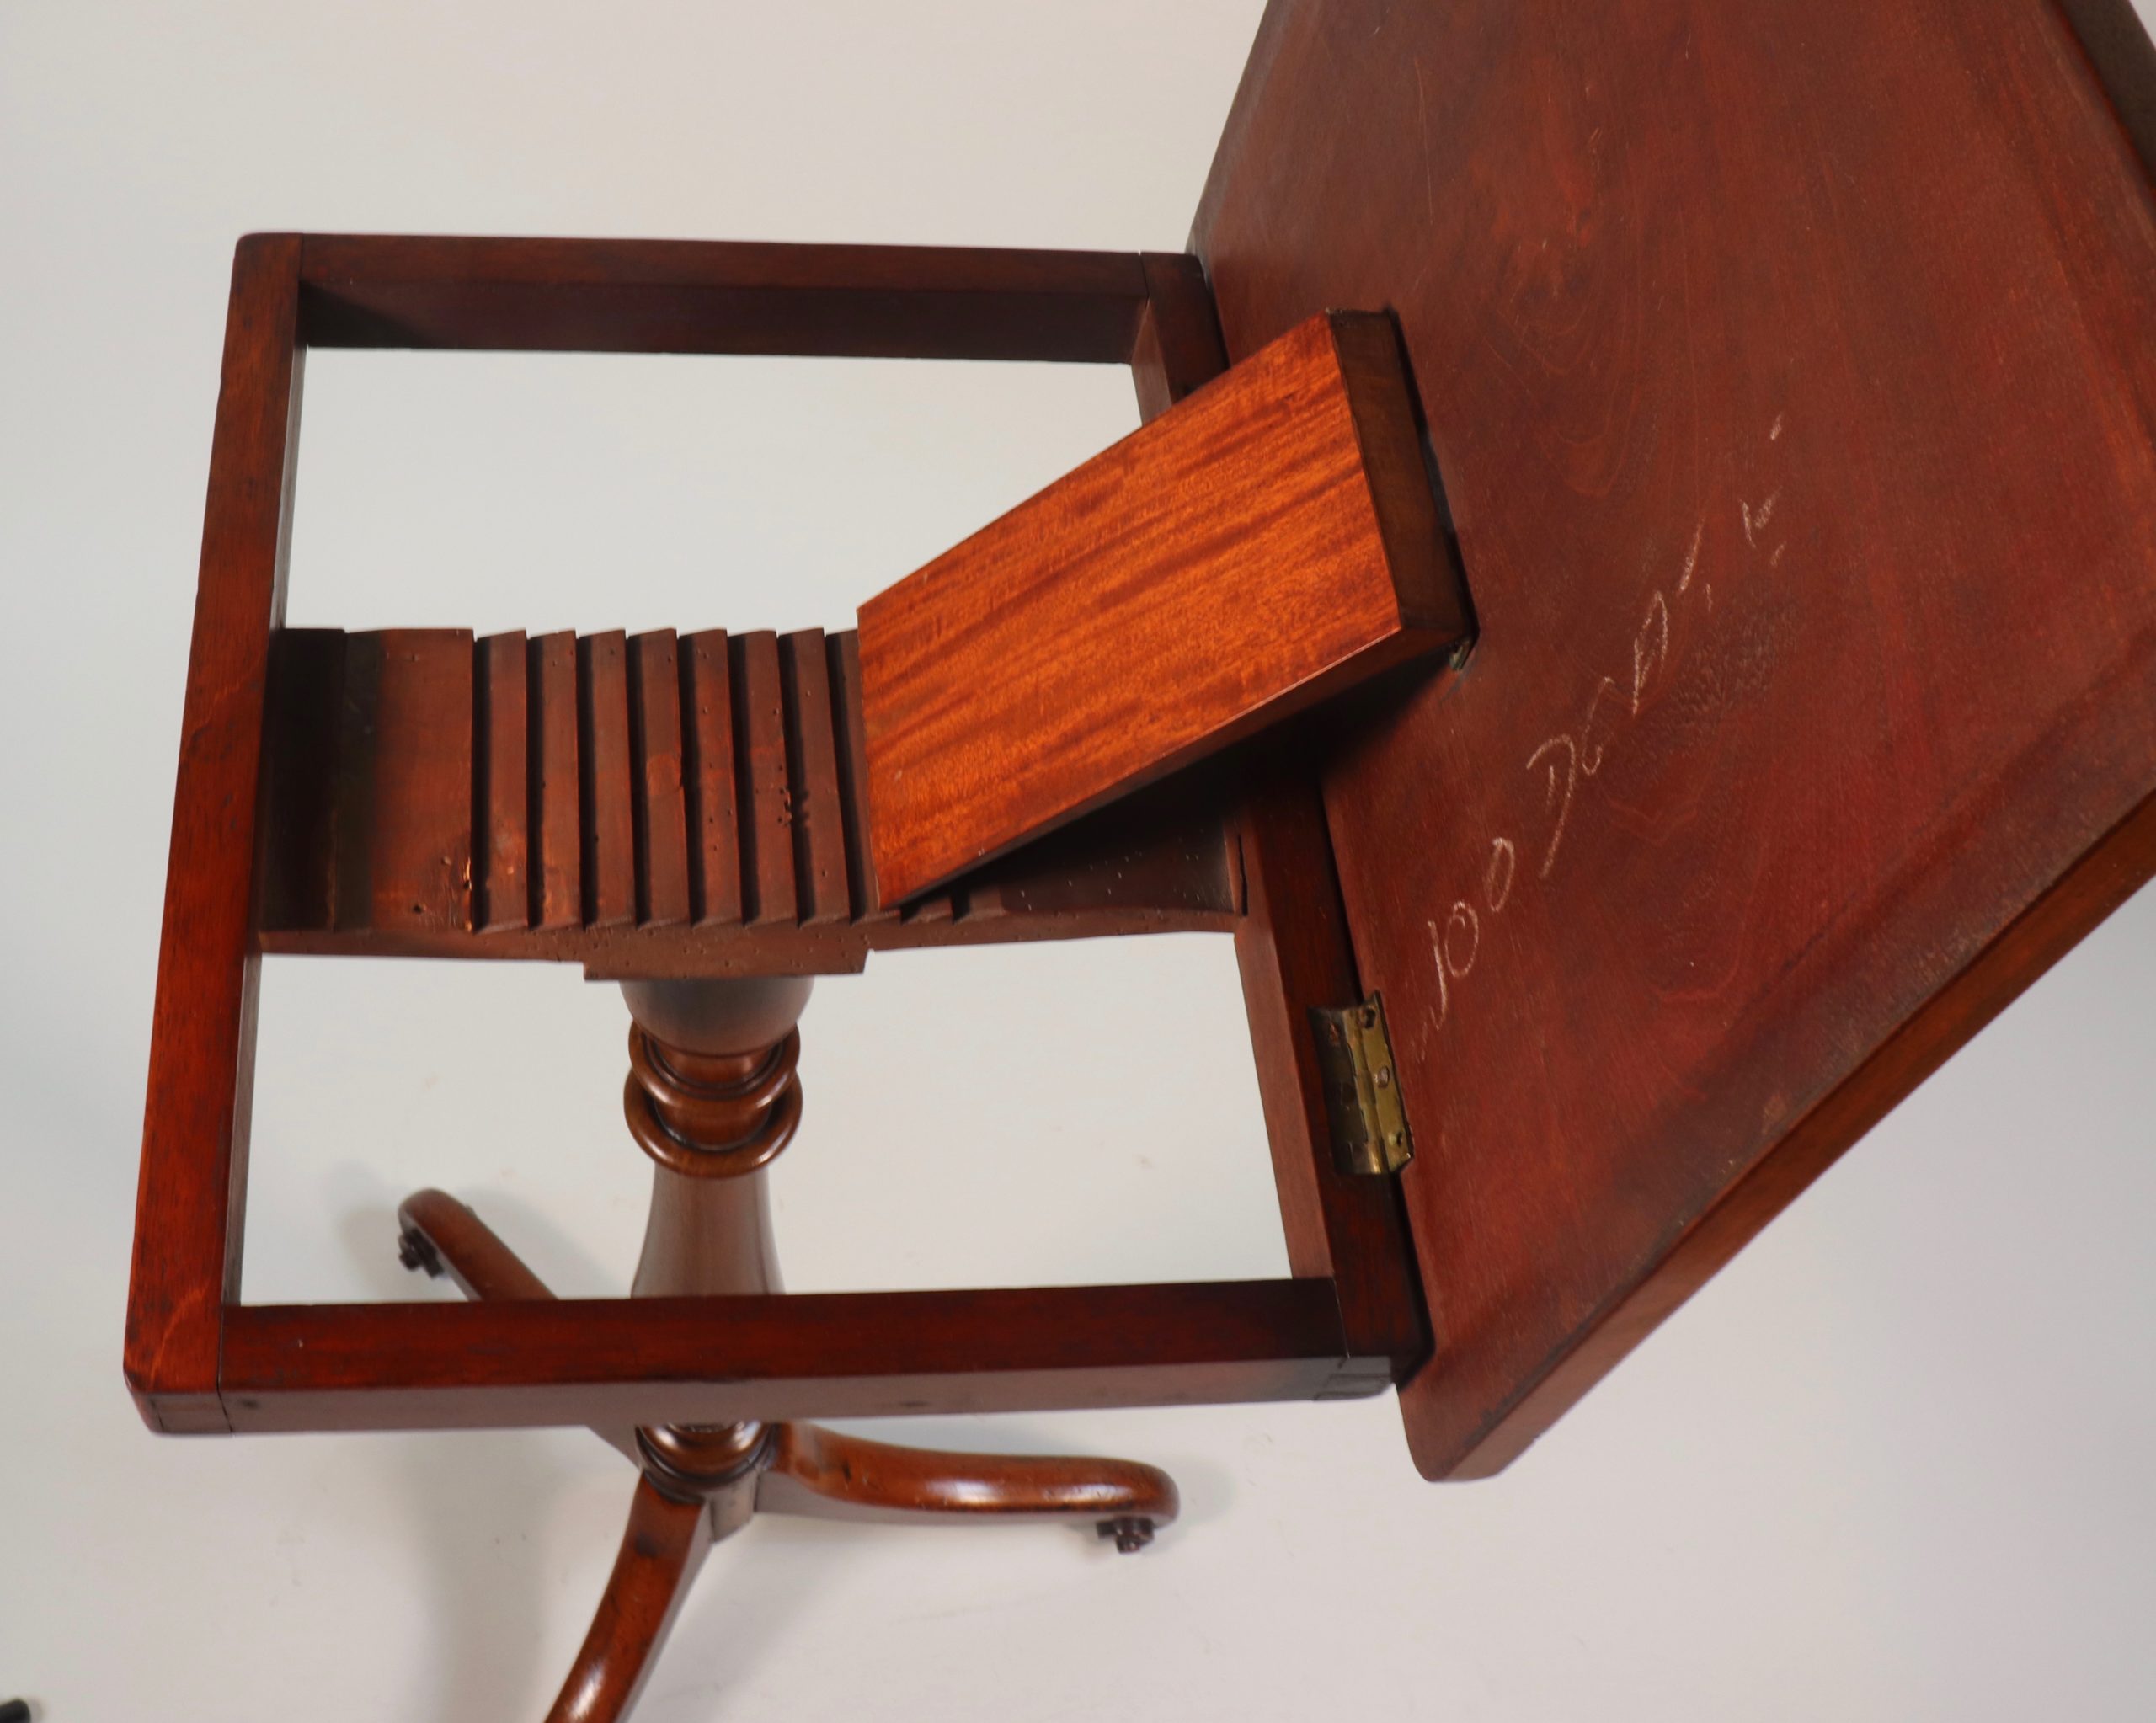 19th c. Mahogany and Brass Book Stand c.1800s